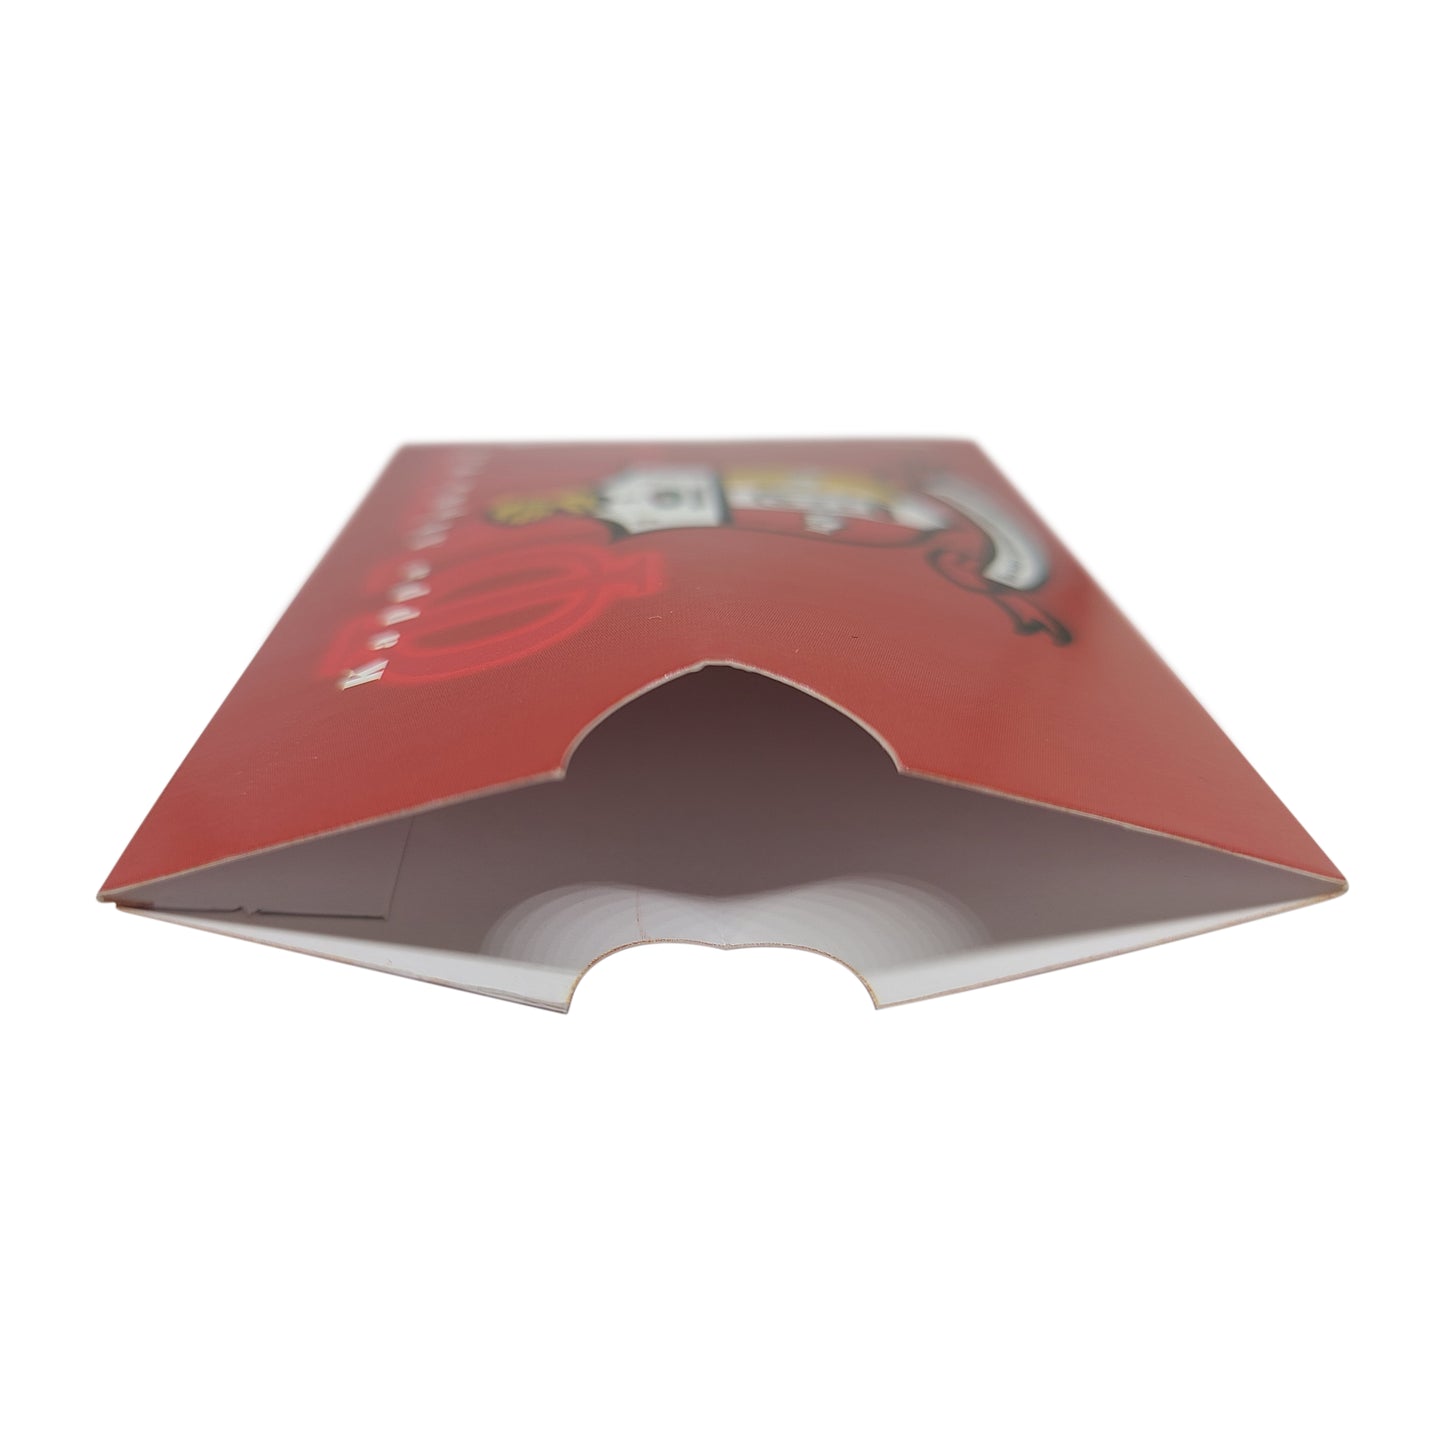 Kappa Alpha Psi Gift Card Holders with envelopes (6 count)